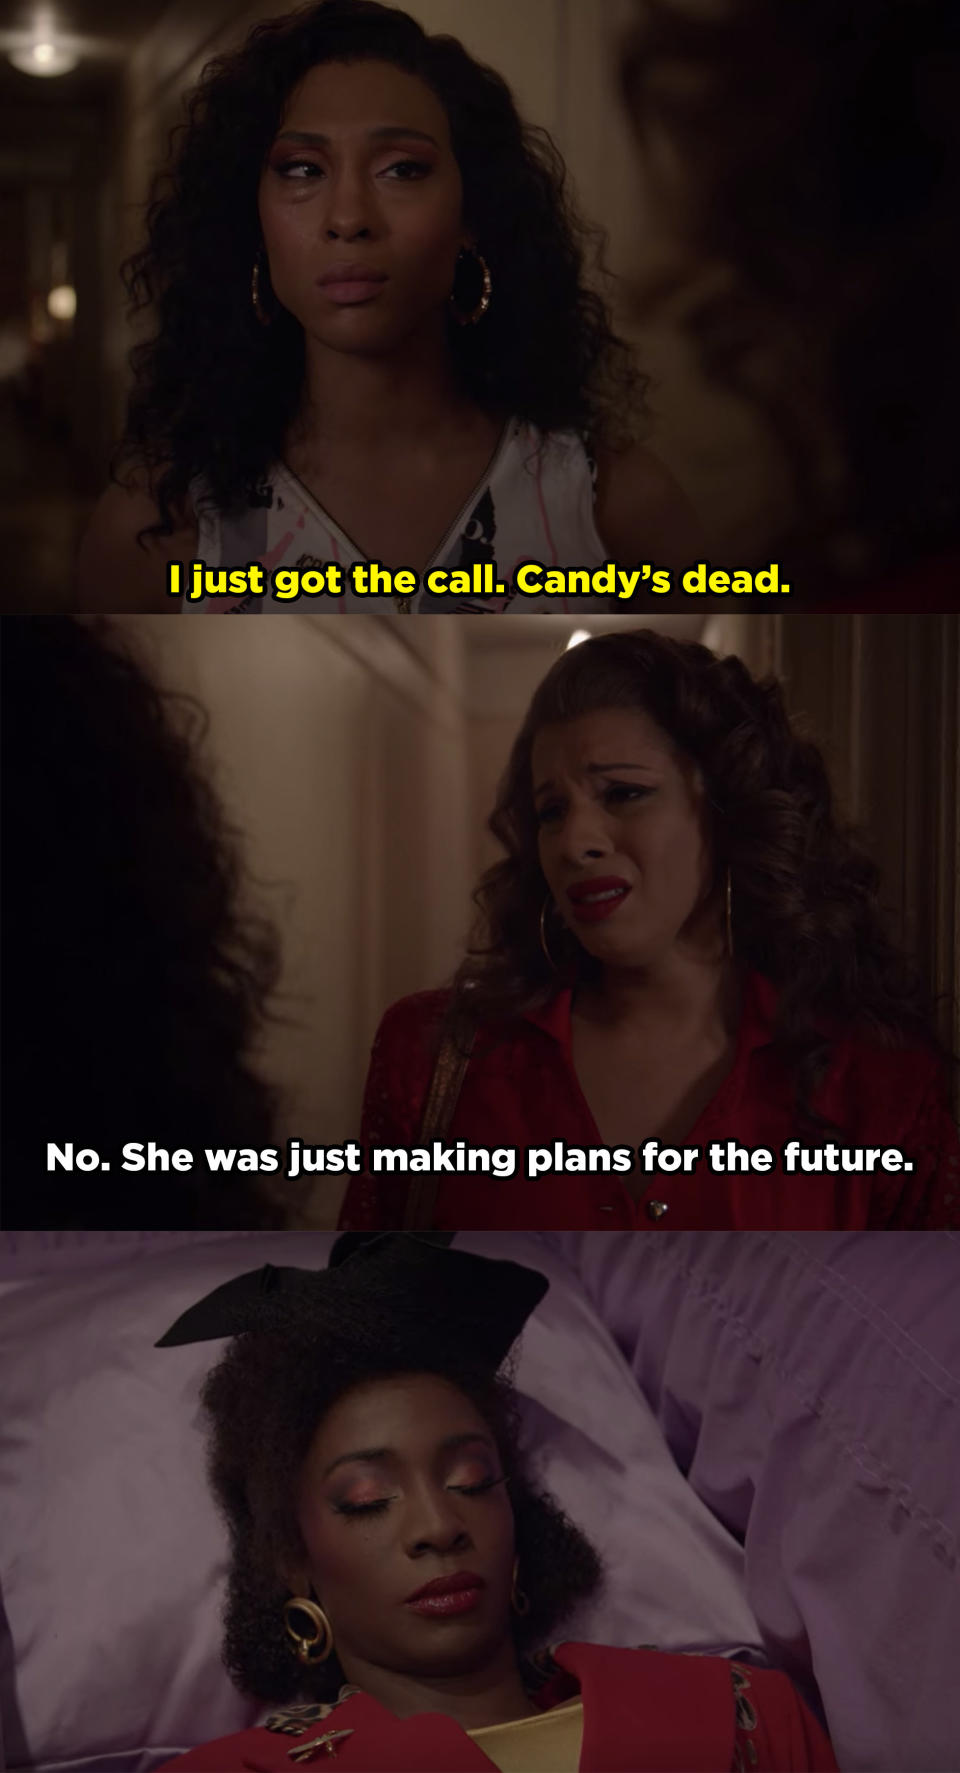 Blanca gets the call that Candy died, right as she was planning for the future, and the girls attend her funeral.